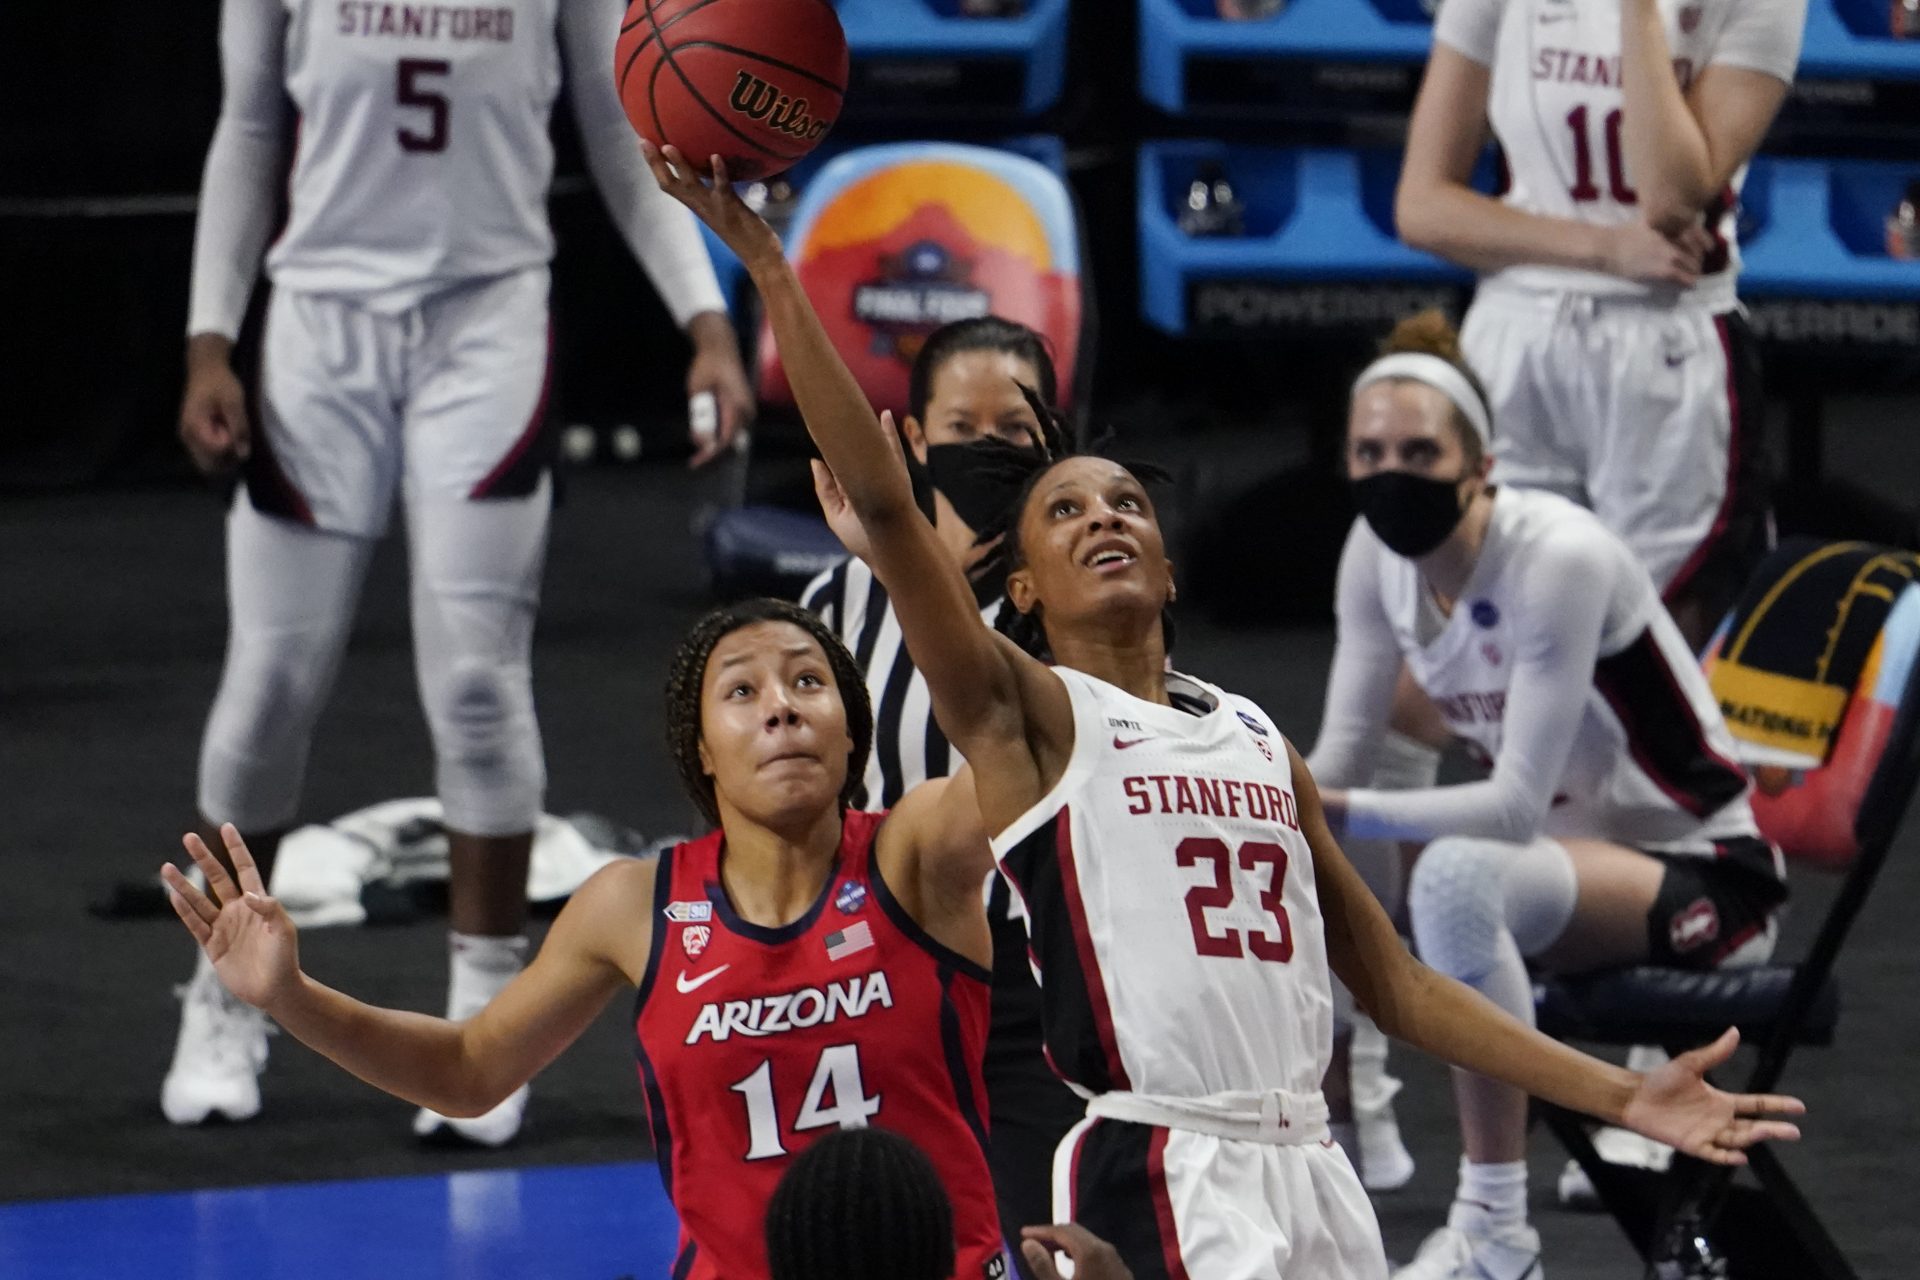 Stanford guard Kiana Williams (23) shoots over Arizona forward Sam Thomas (14) during the second half of the championship game in the women's Final Four NCAA college basketball tournament, Sunday, April 4, 2021, at the Alamodome in San Antonio.